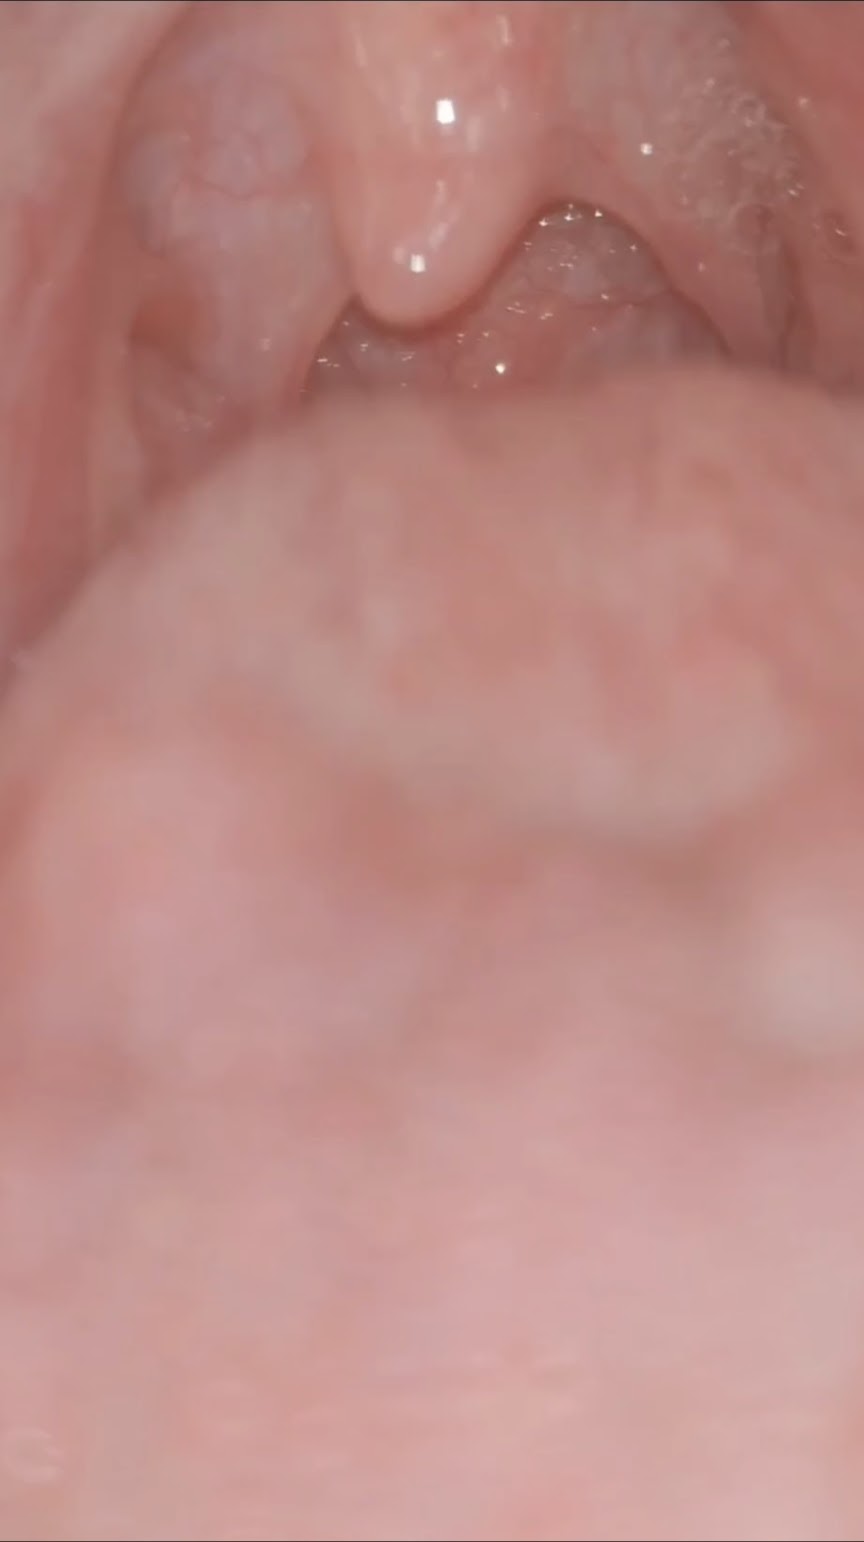 Girl shows her uvula and coughs